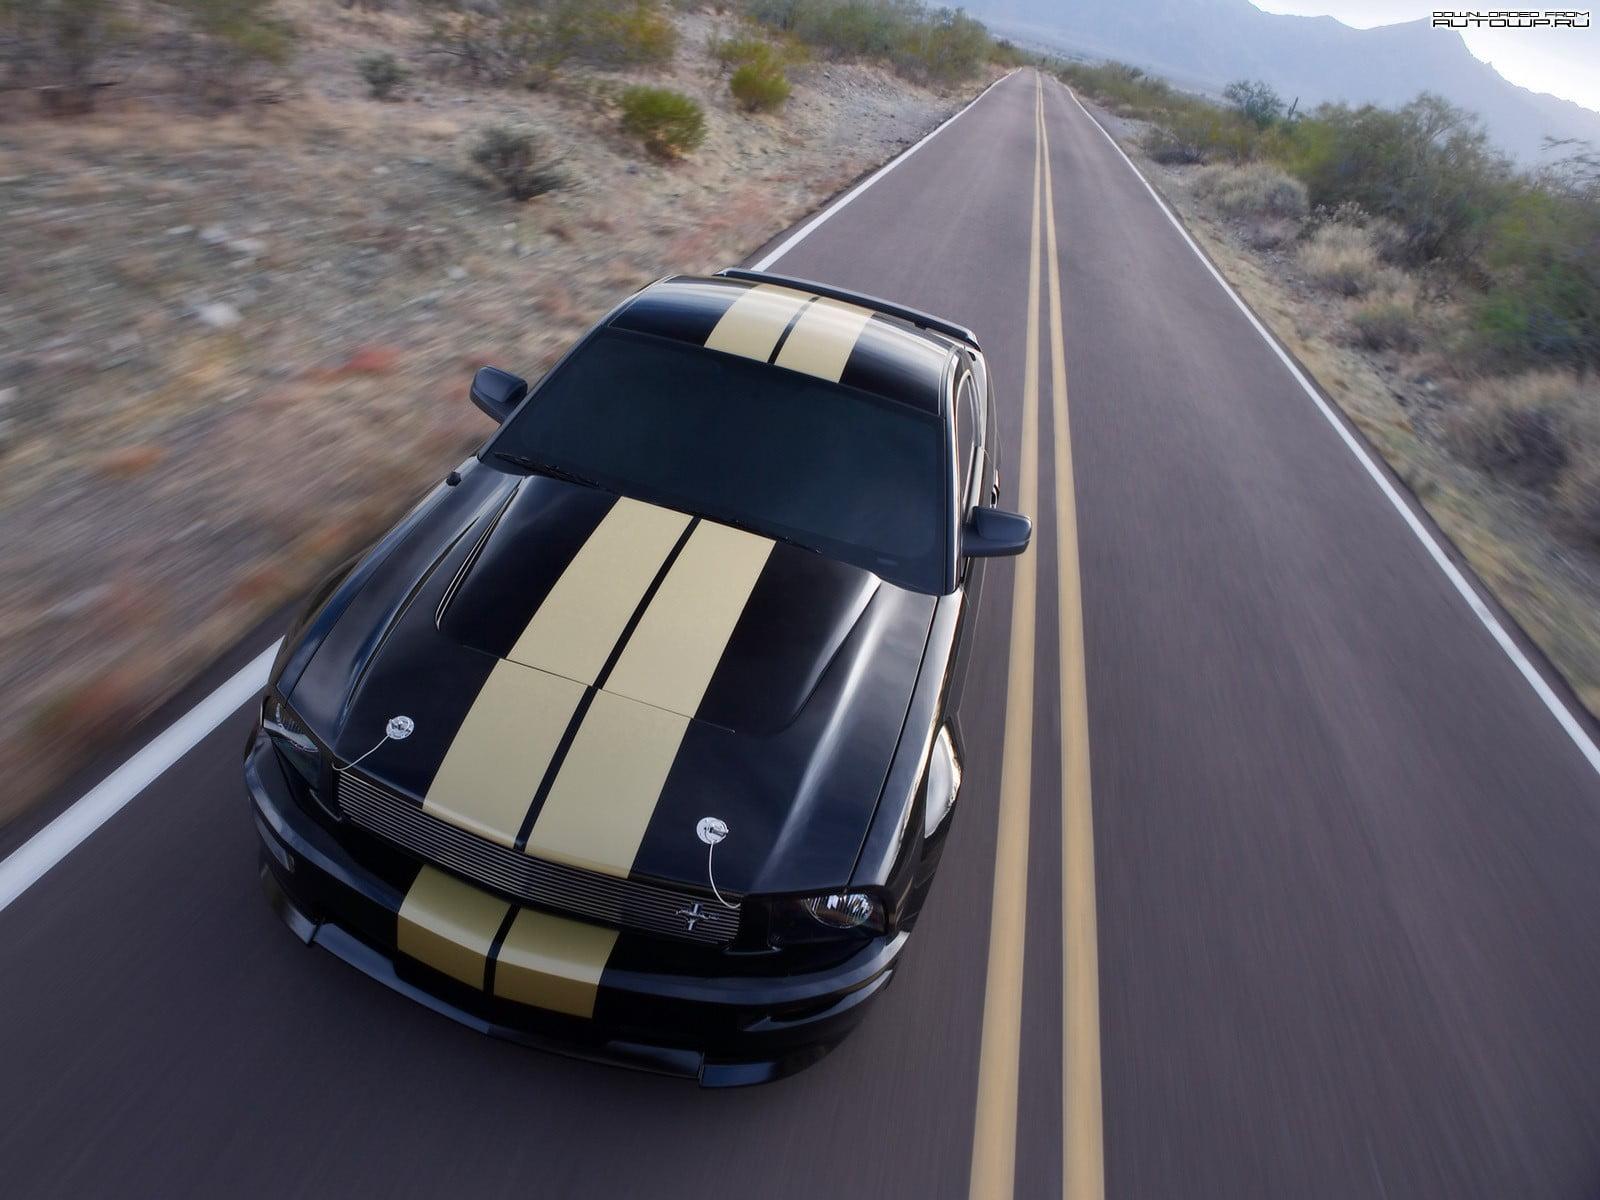 Black and gold Ford Mustang GT coupe, Ford Mustang, muscle